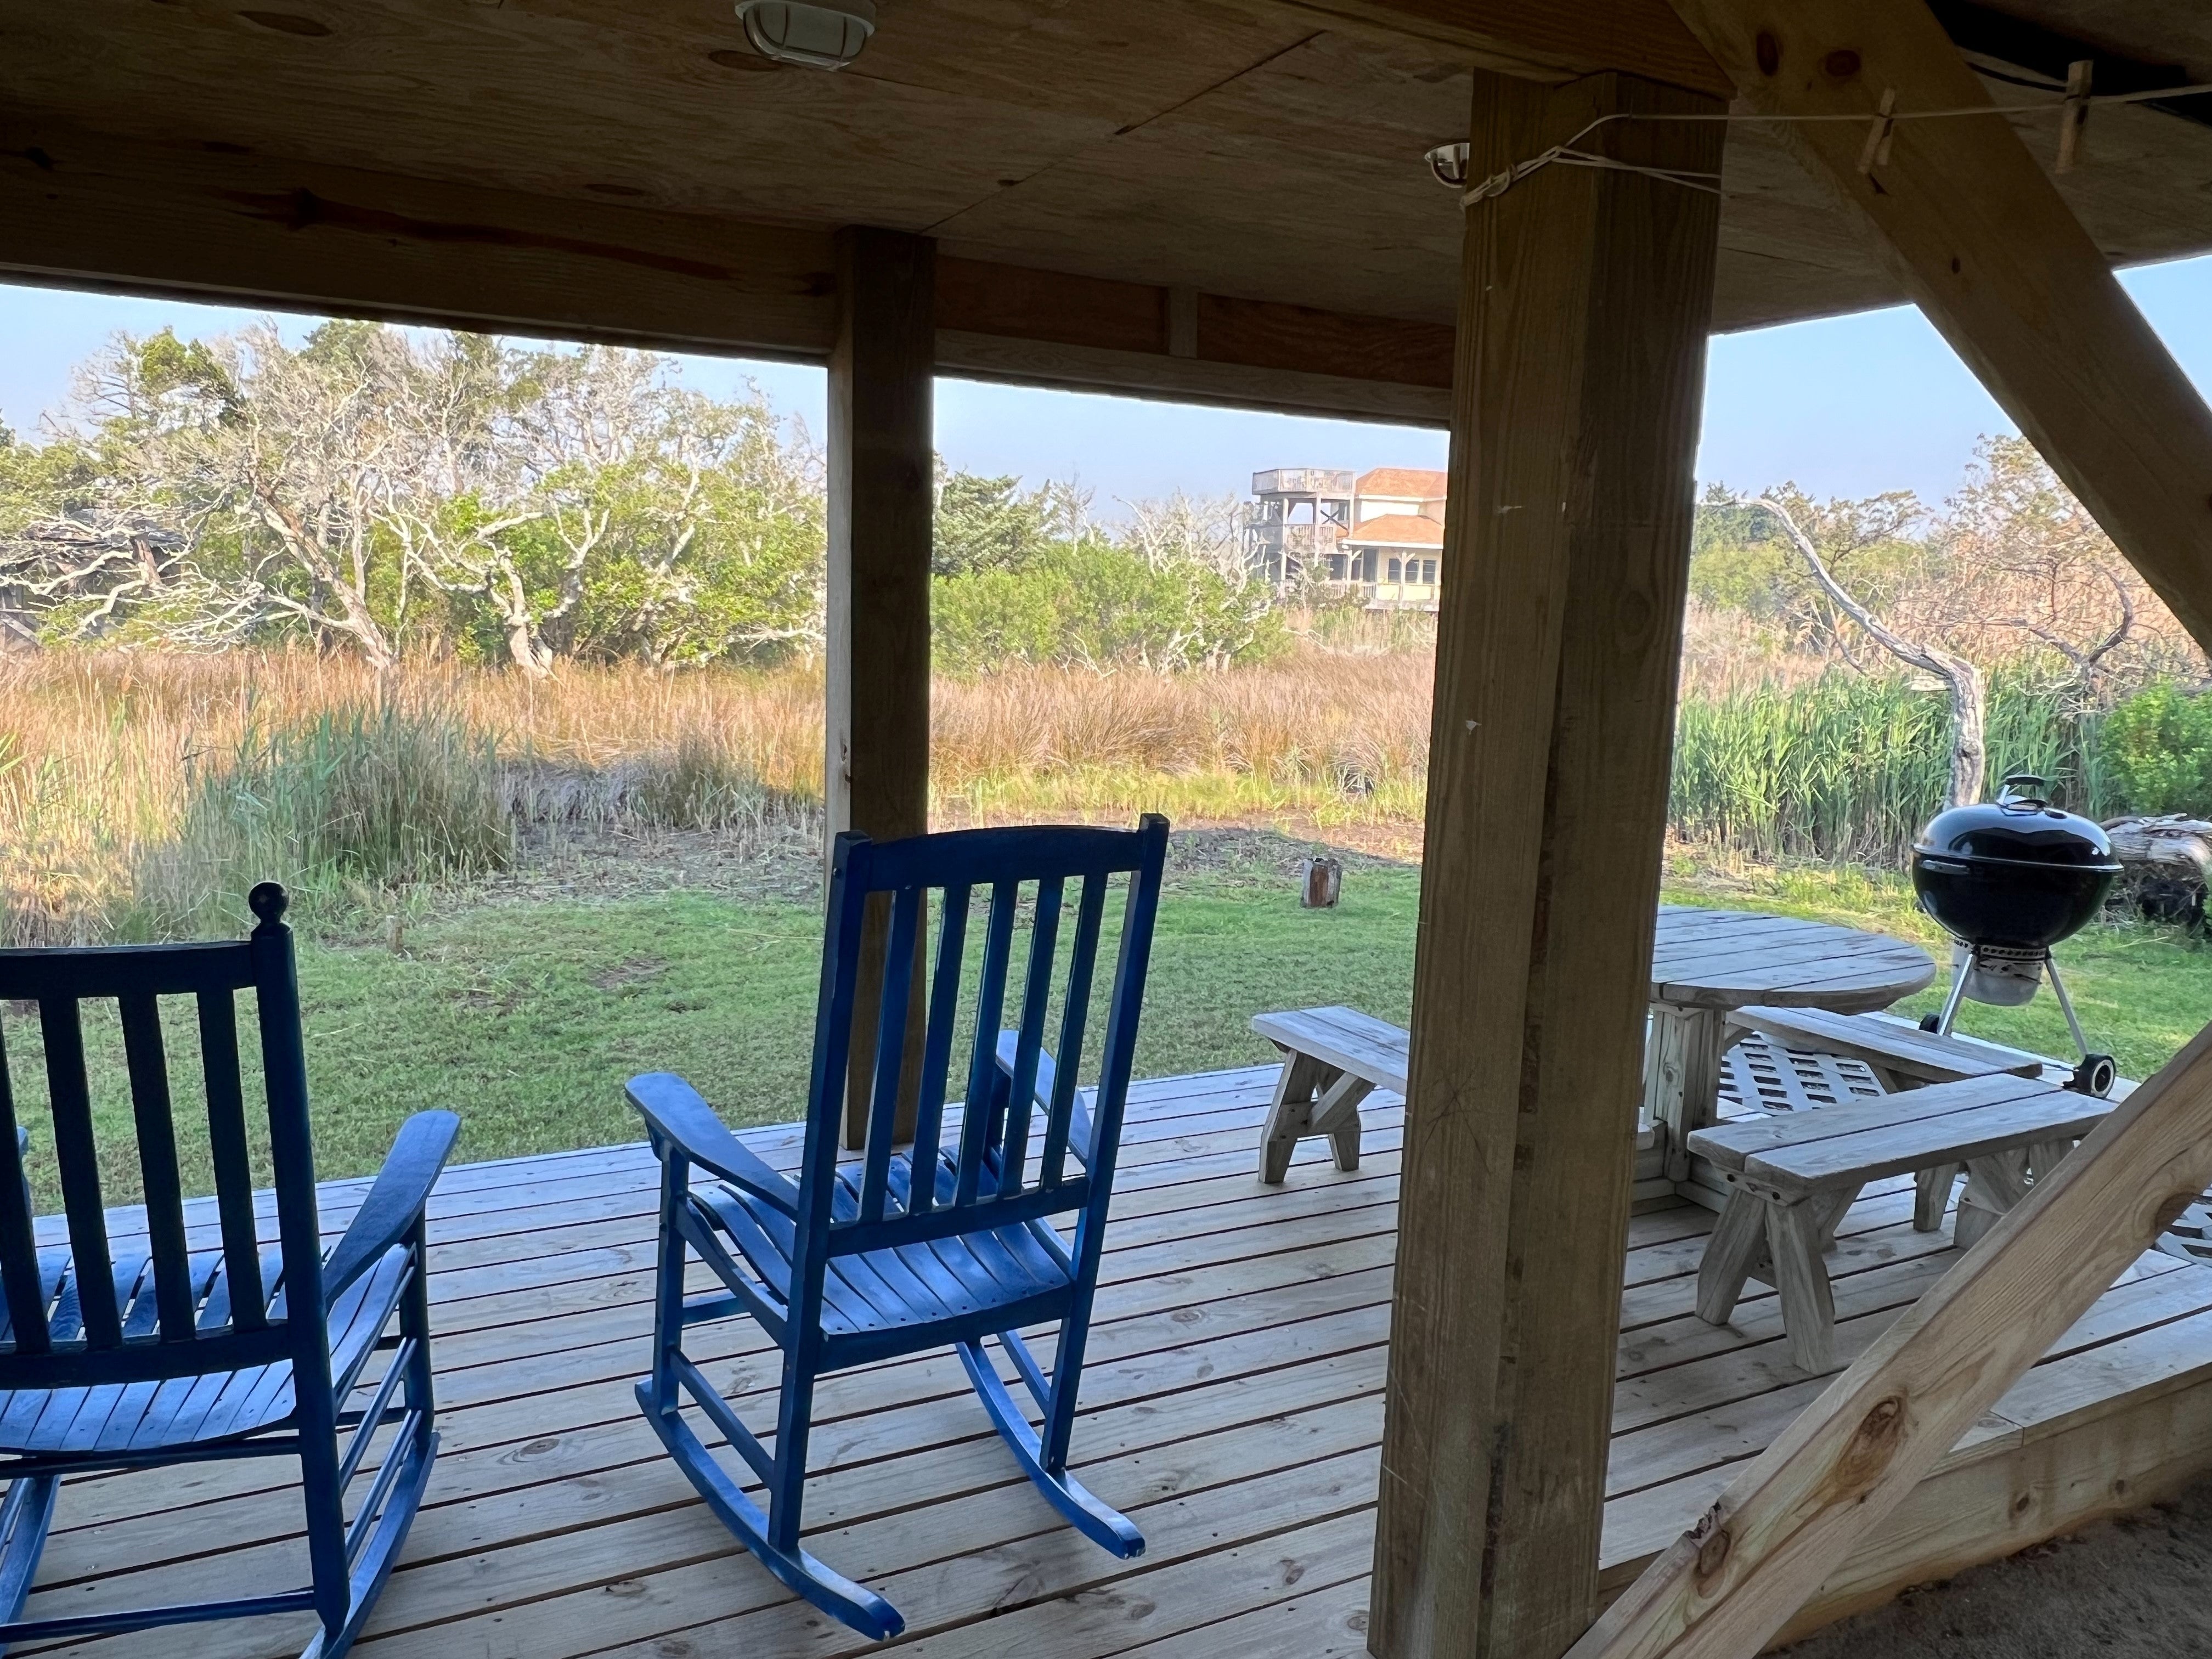 Seating Area Under House Overlooking the Marsh